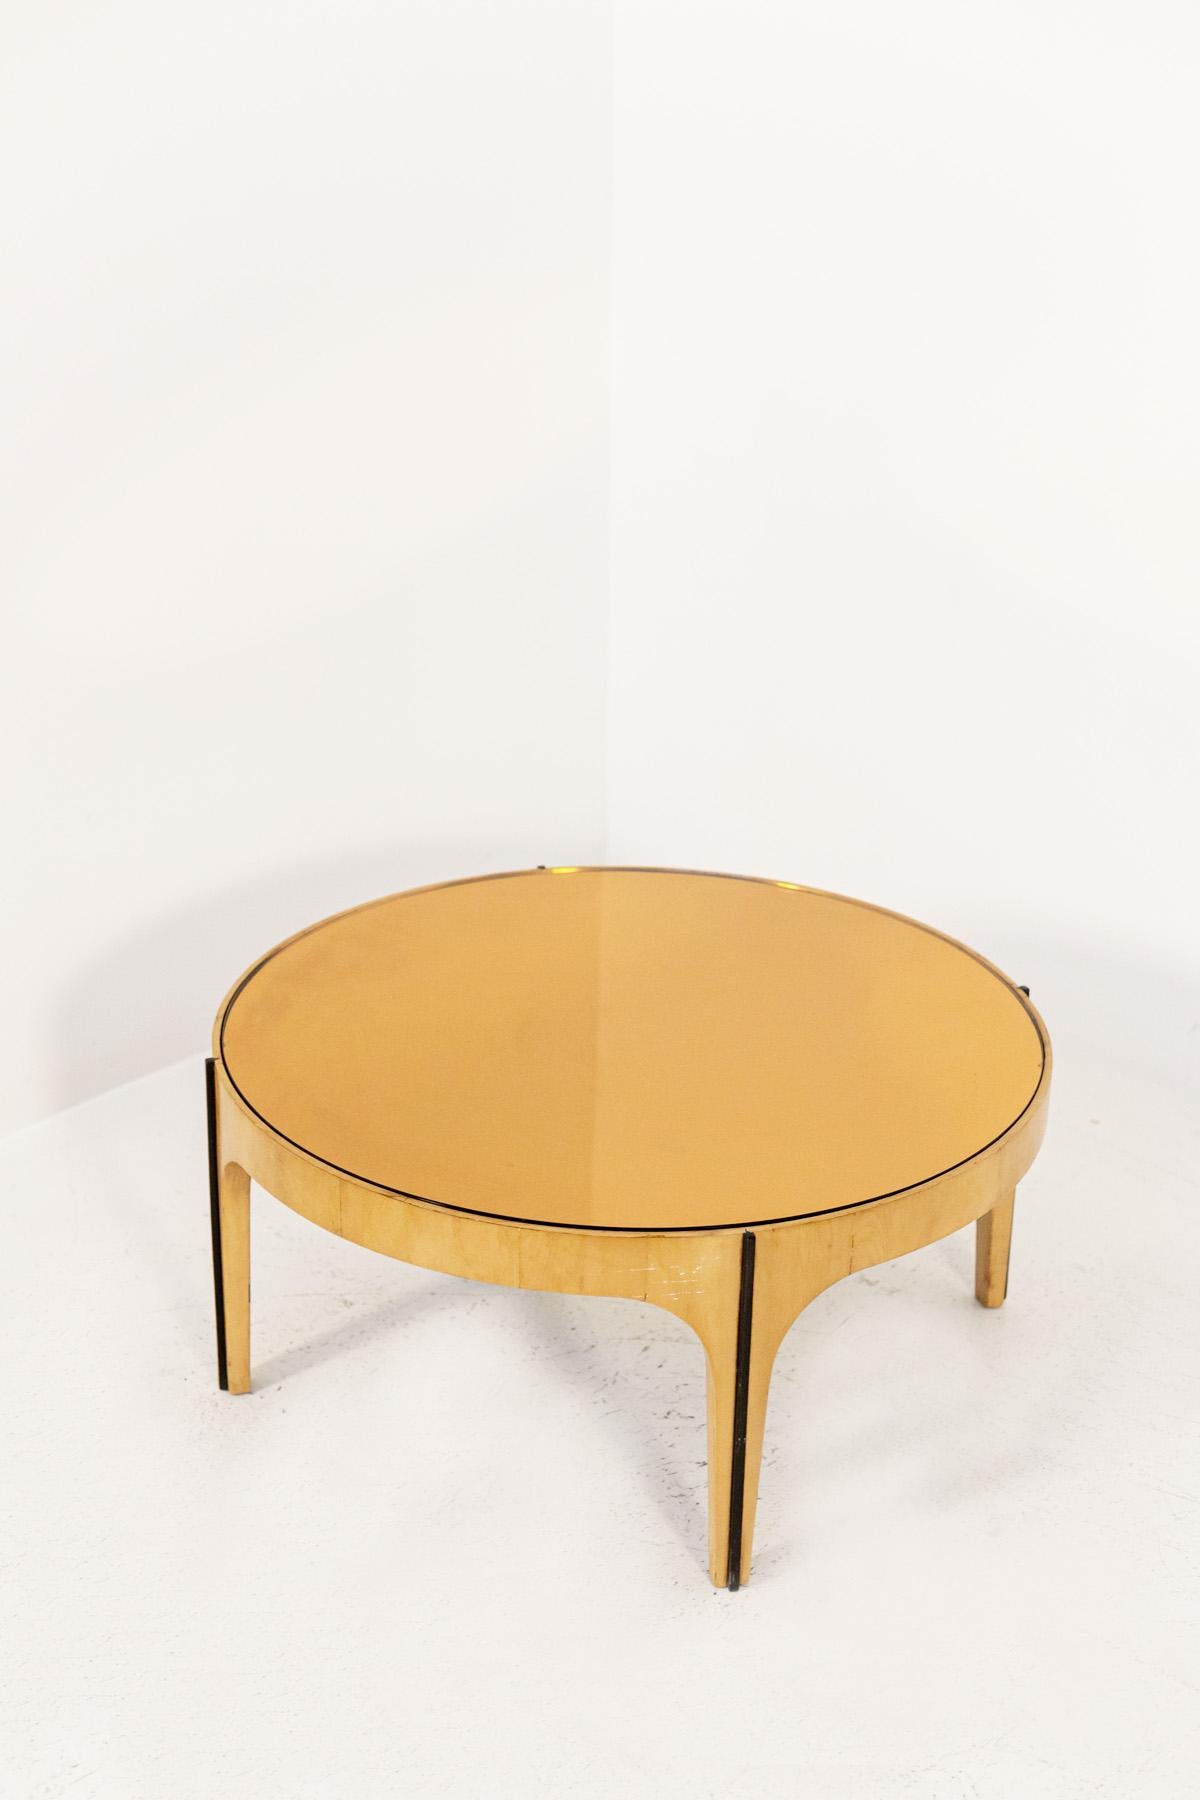 Fontana Arte Coffee Table in Maple Wood and Mirrored Glass 1